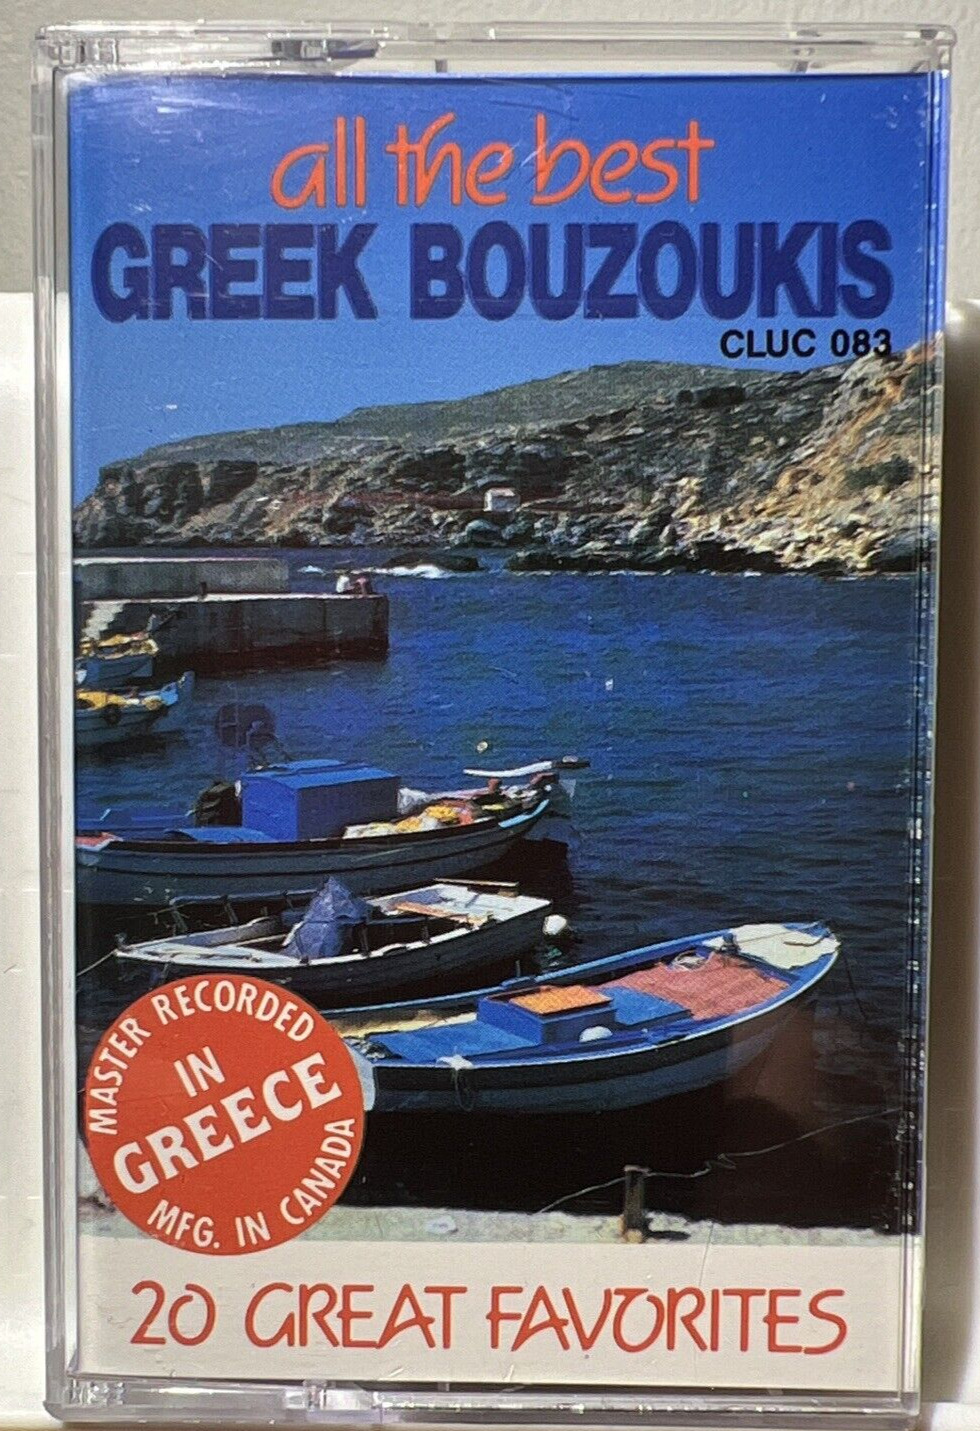 All the Best 20 Greek favorites Bouzoukis Various Artists Cassette Play Tested